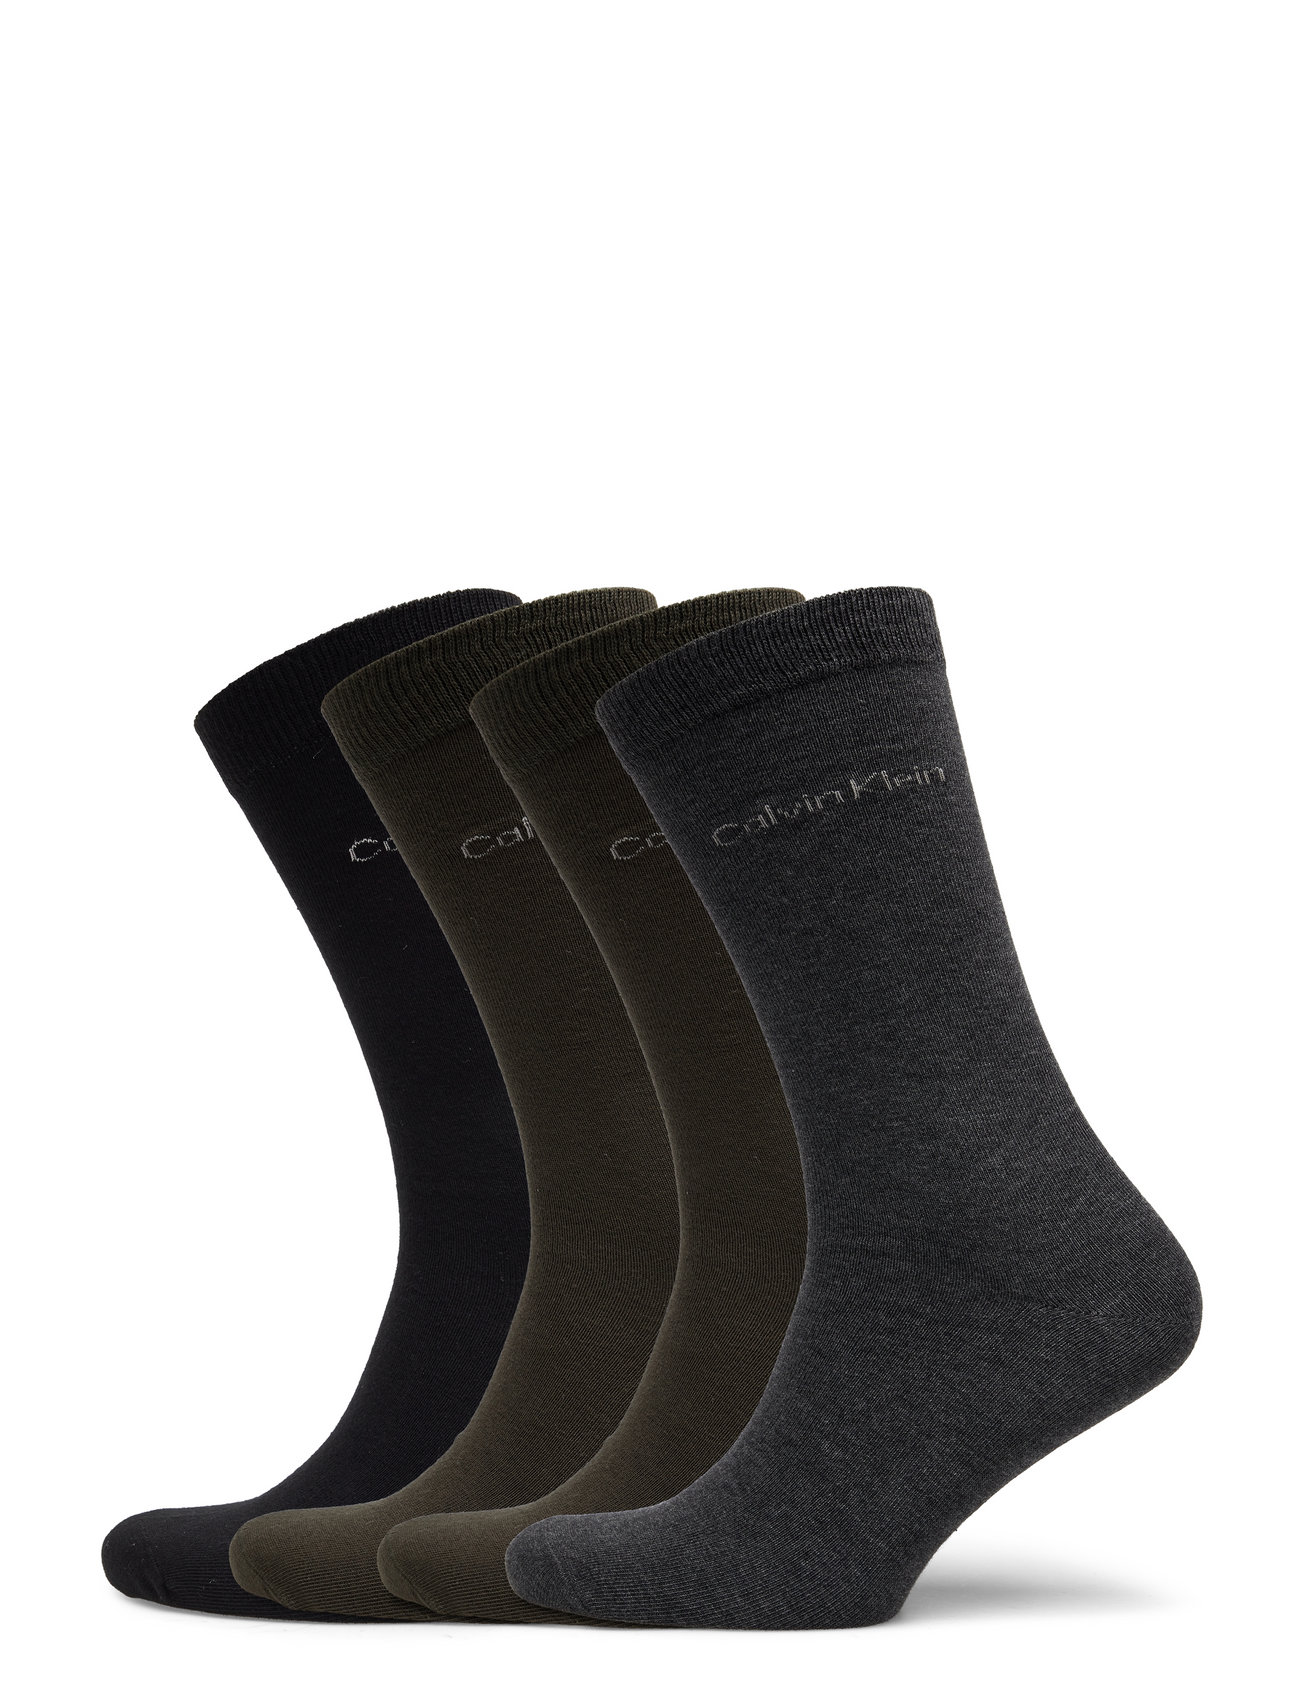 Calvin Klein Ck Men Sock 4p Tin Giftbox (Dark Olive Combo), (17 €) | Large  selection of outlet-styles 